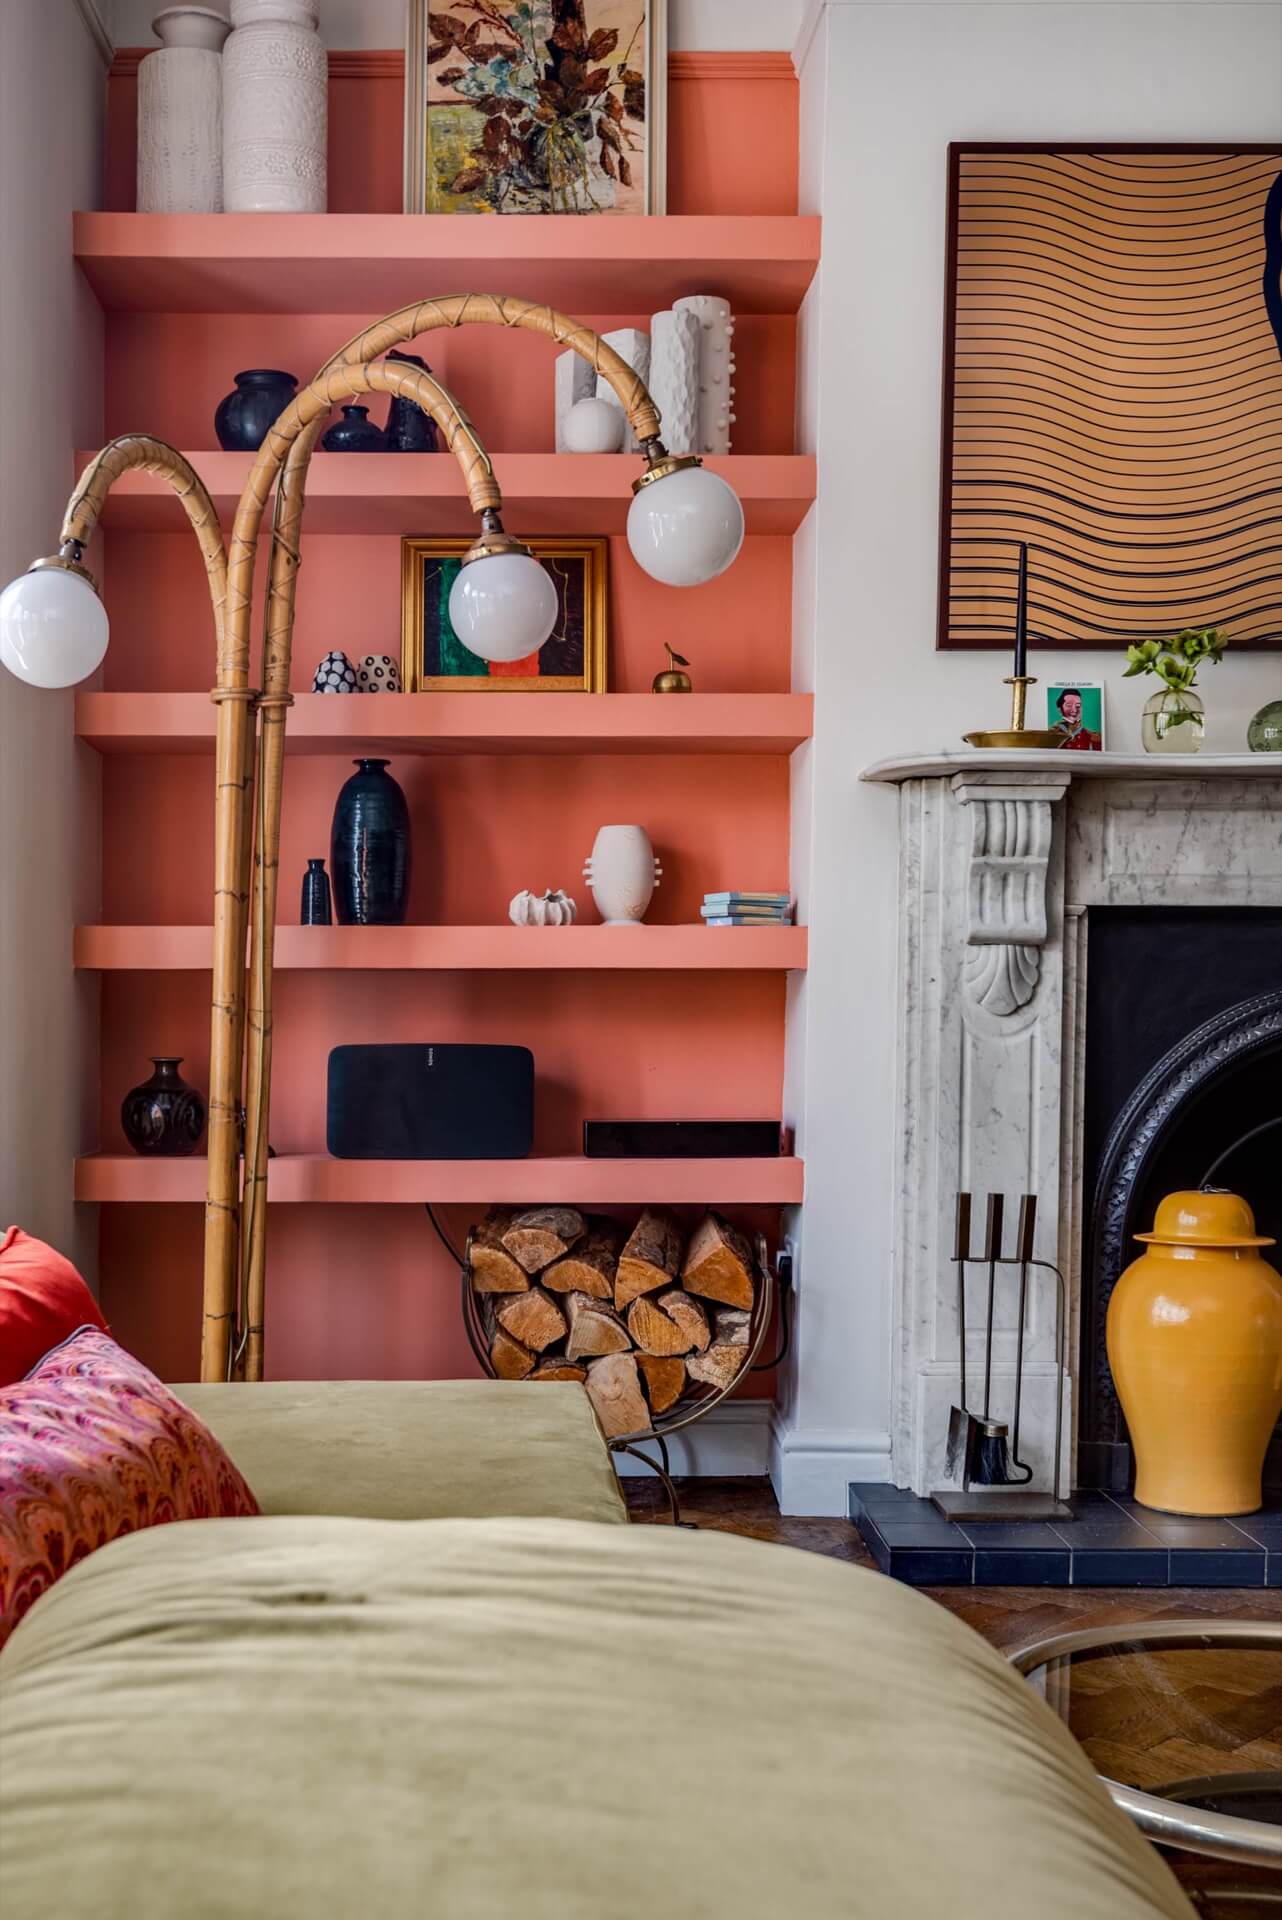 Living room with coral pink alcove shelving